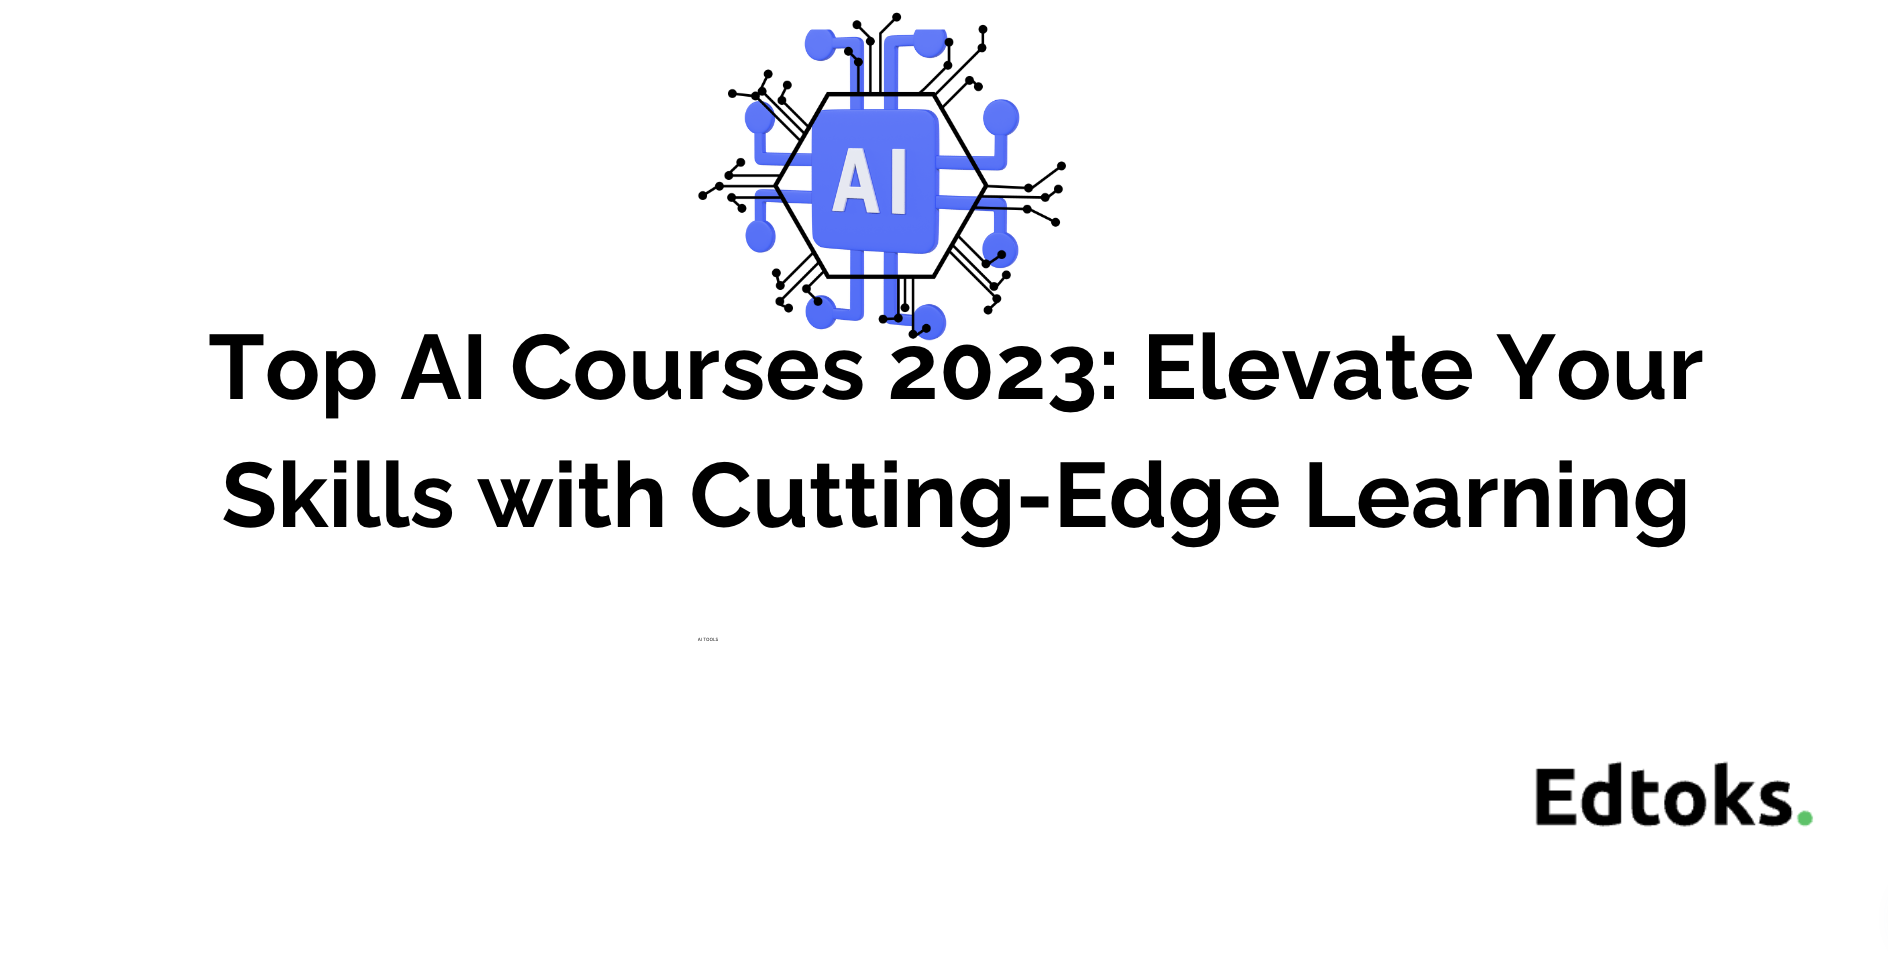 Top 15 AI Courses : Elevate Your Skills with Cutting-Edge Learning